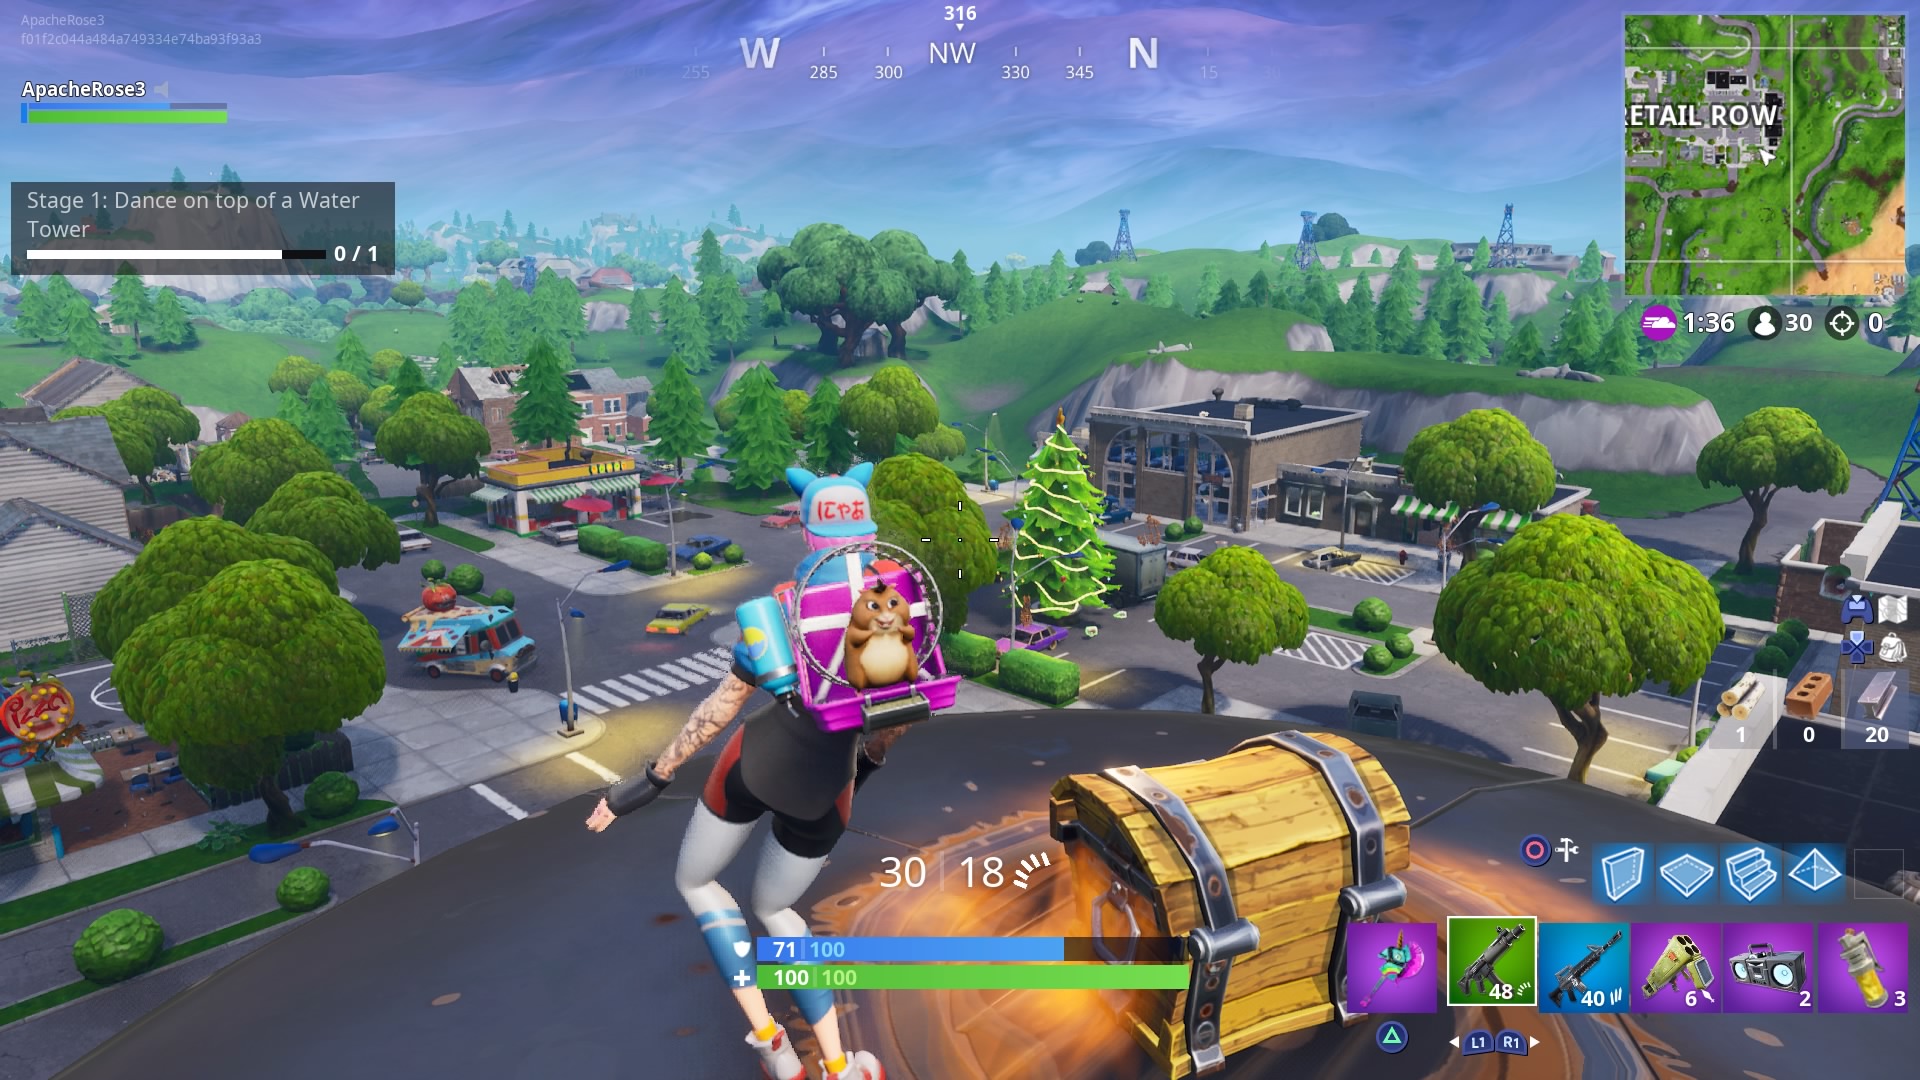 where to dance on top of a water tower ranger tower and air traffic control tower in fortnite season 7 week 5 challenges gamesradar - fortnite challenges dance on top of a water tower